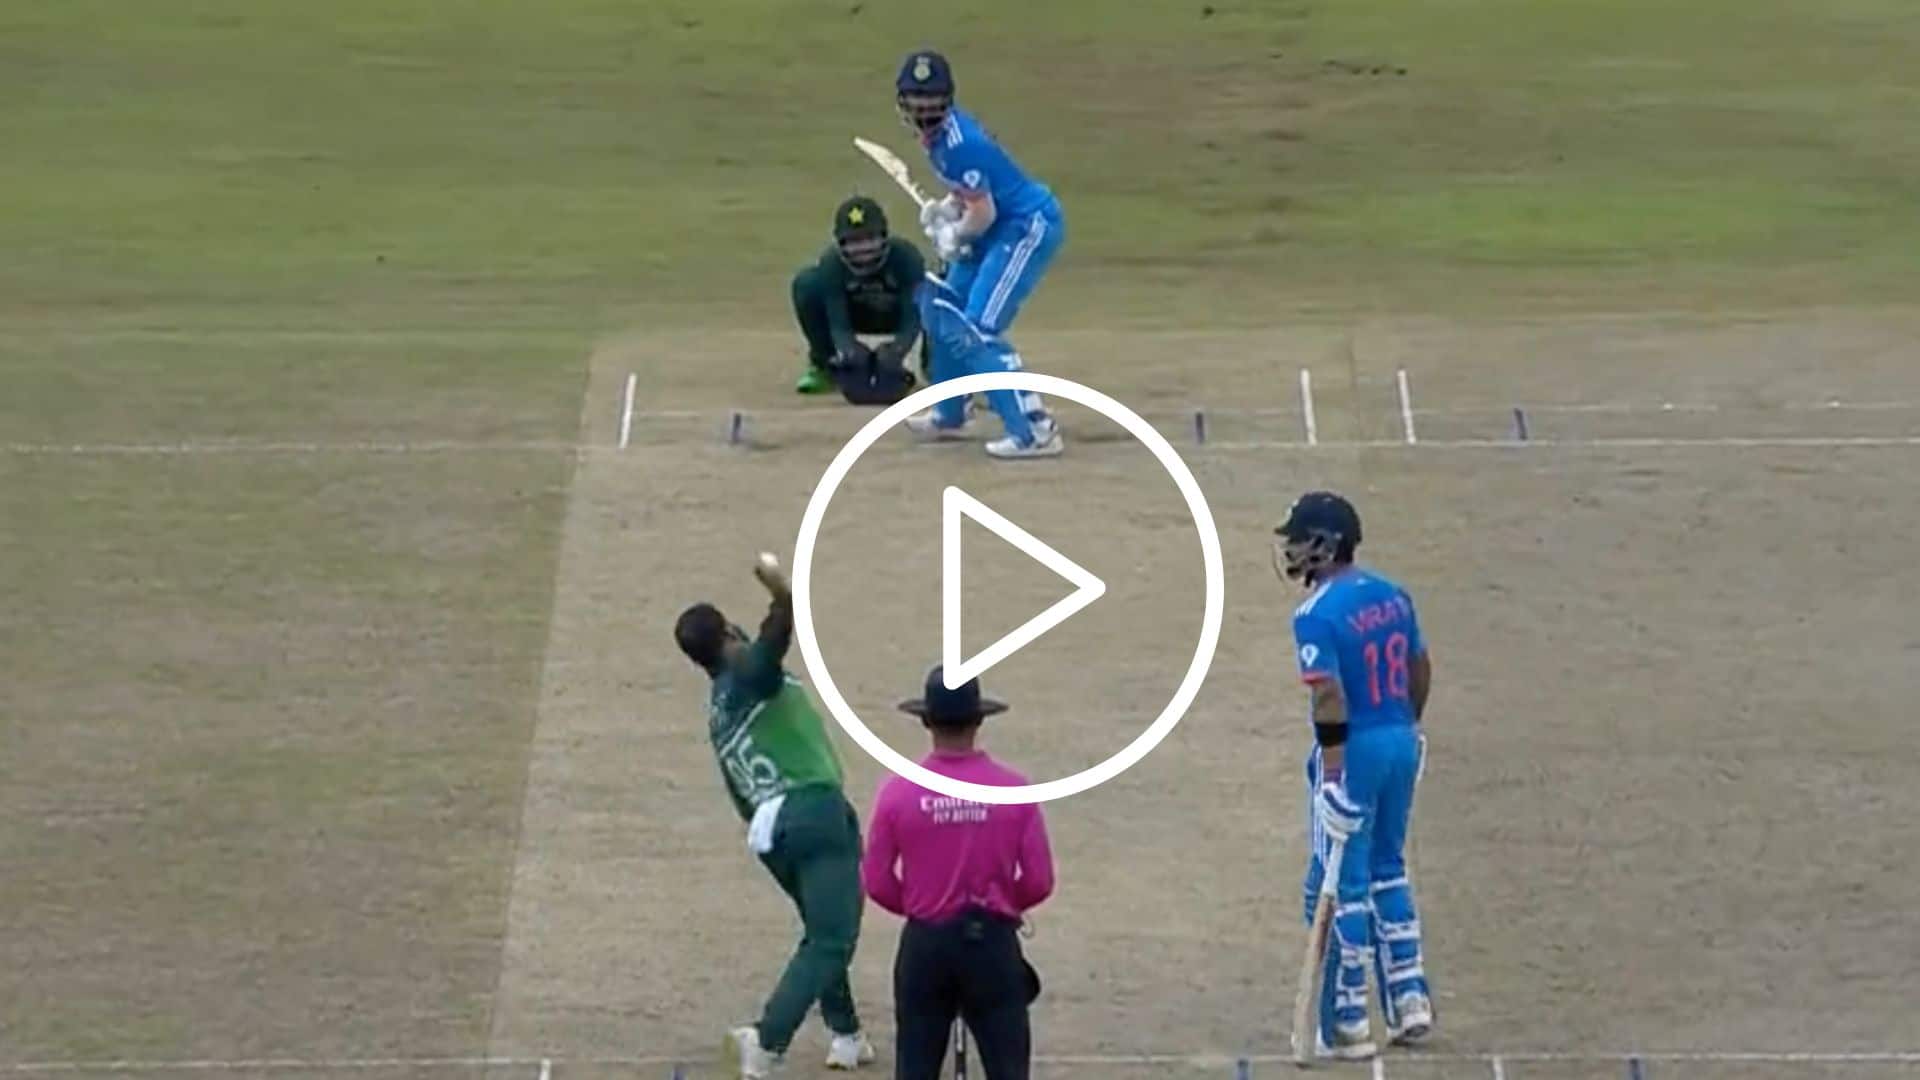 [Watch] KL Rahul Shows Audacity With ‘Handsome’ Six Against Iftikhar Ahmed